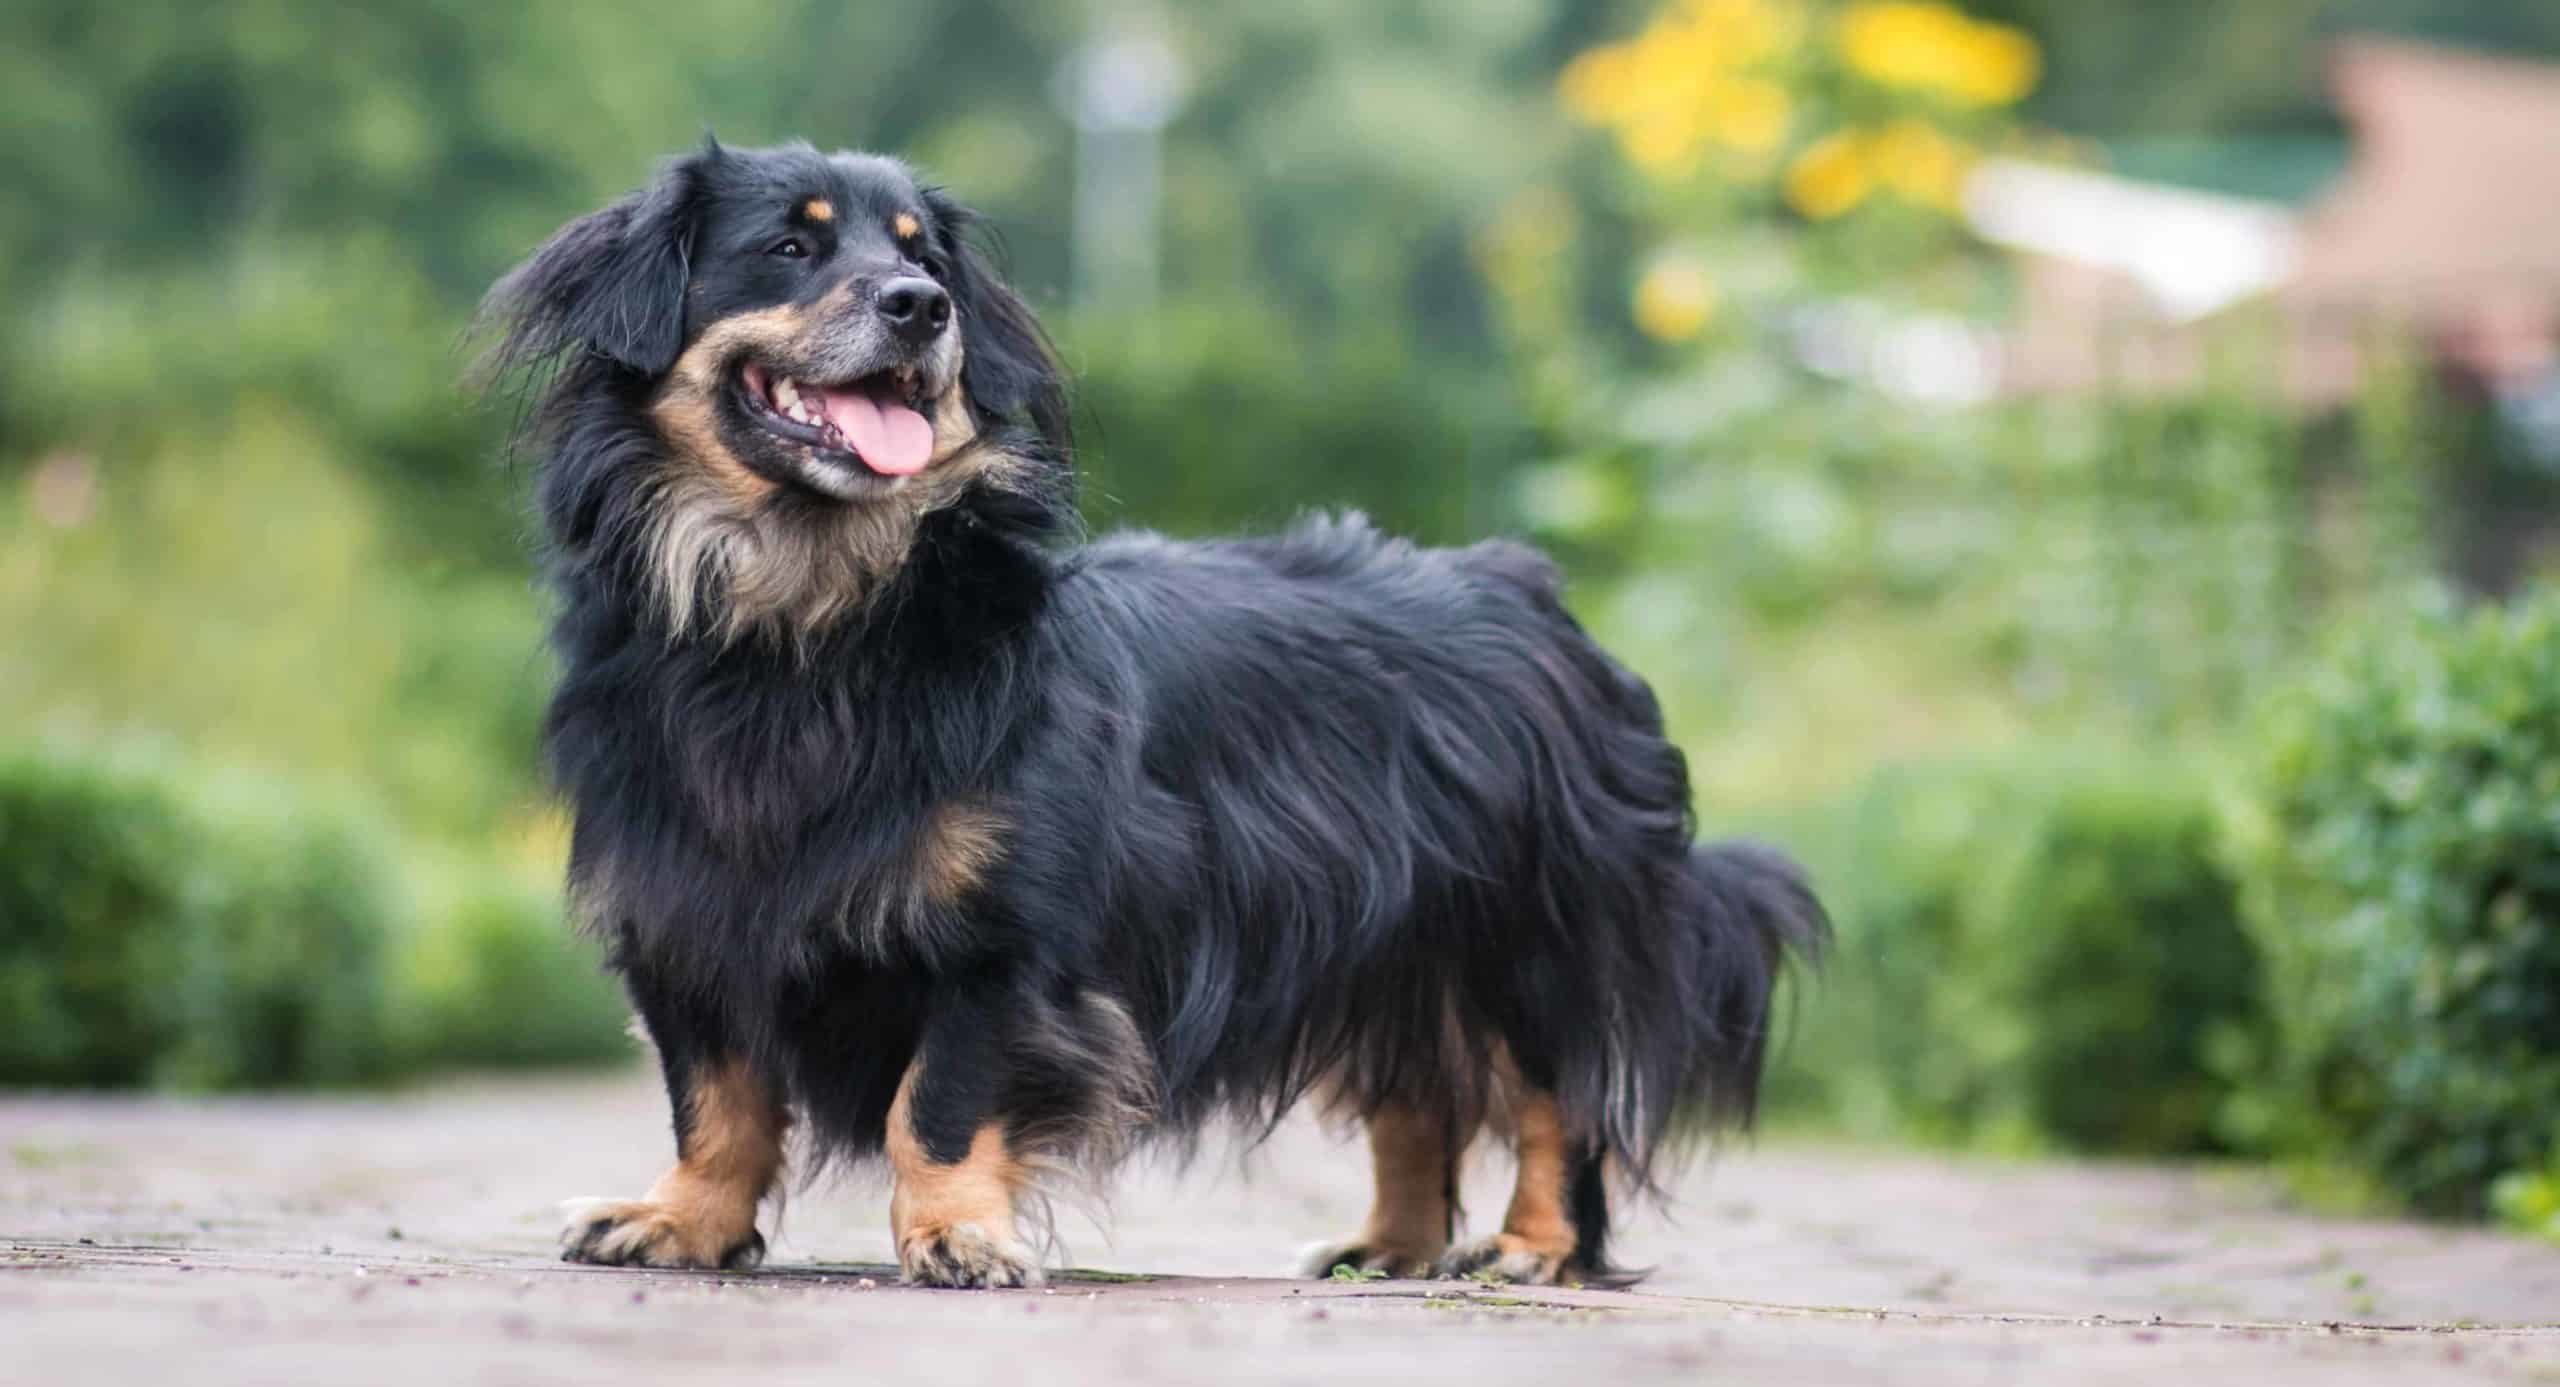 The Border Collie-Dachshund is a mixed breed dog that comes from two purebred parents, the Dachshund and the Border Collie.